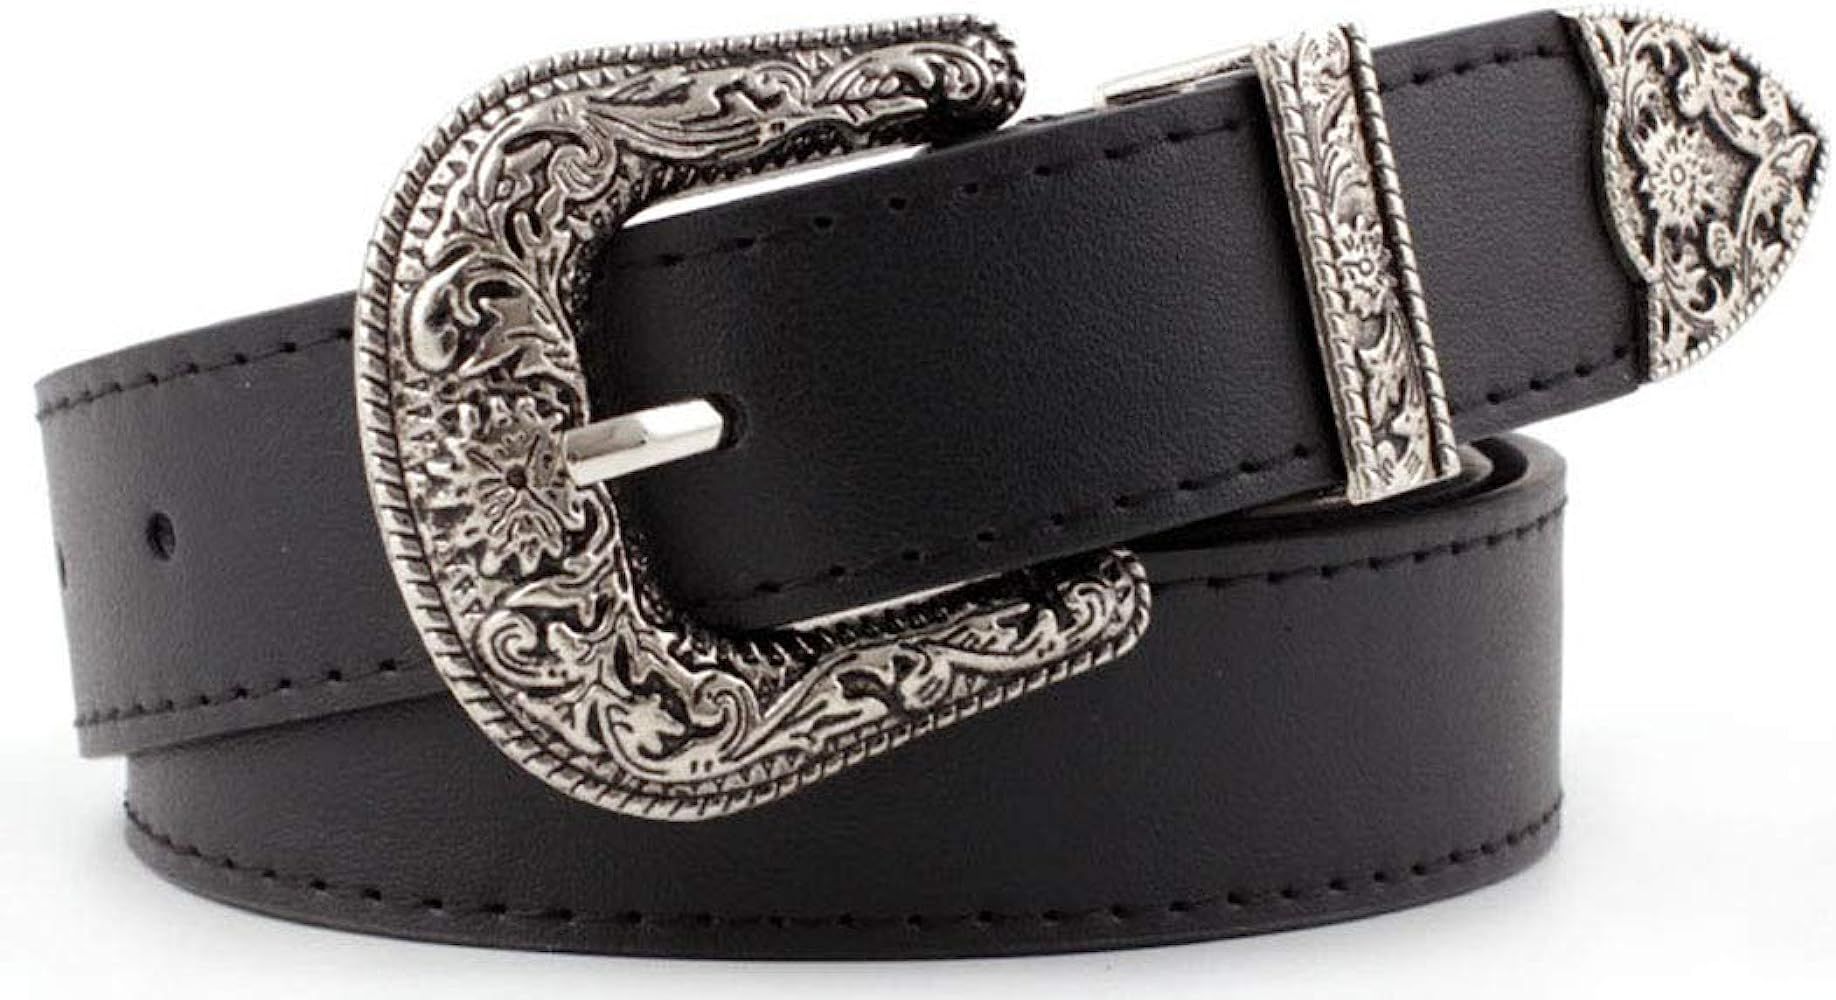 INOGIH Western-Leather-Belts-Women Vintage Waist-Belts with Hollow Out Flower Buckle | Amazon (US)